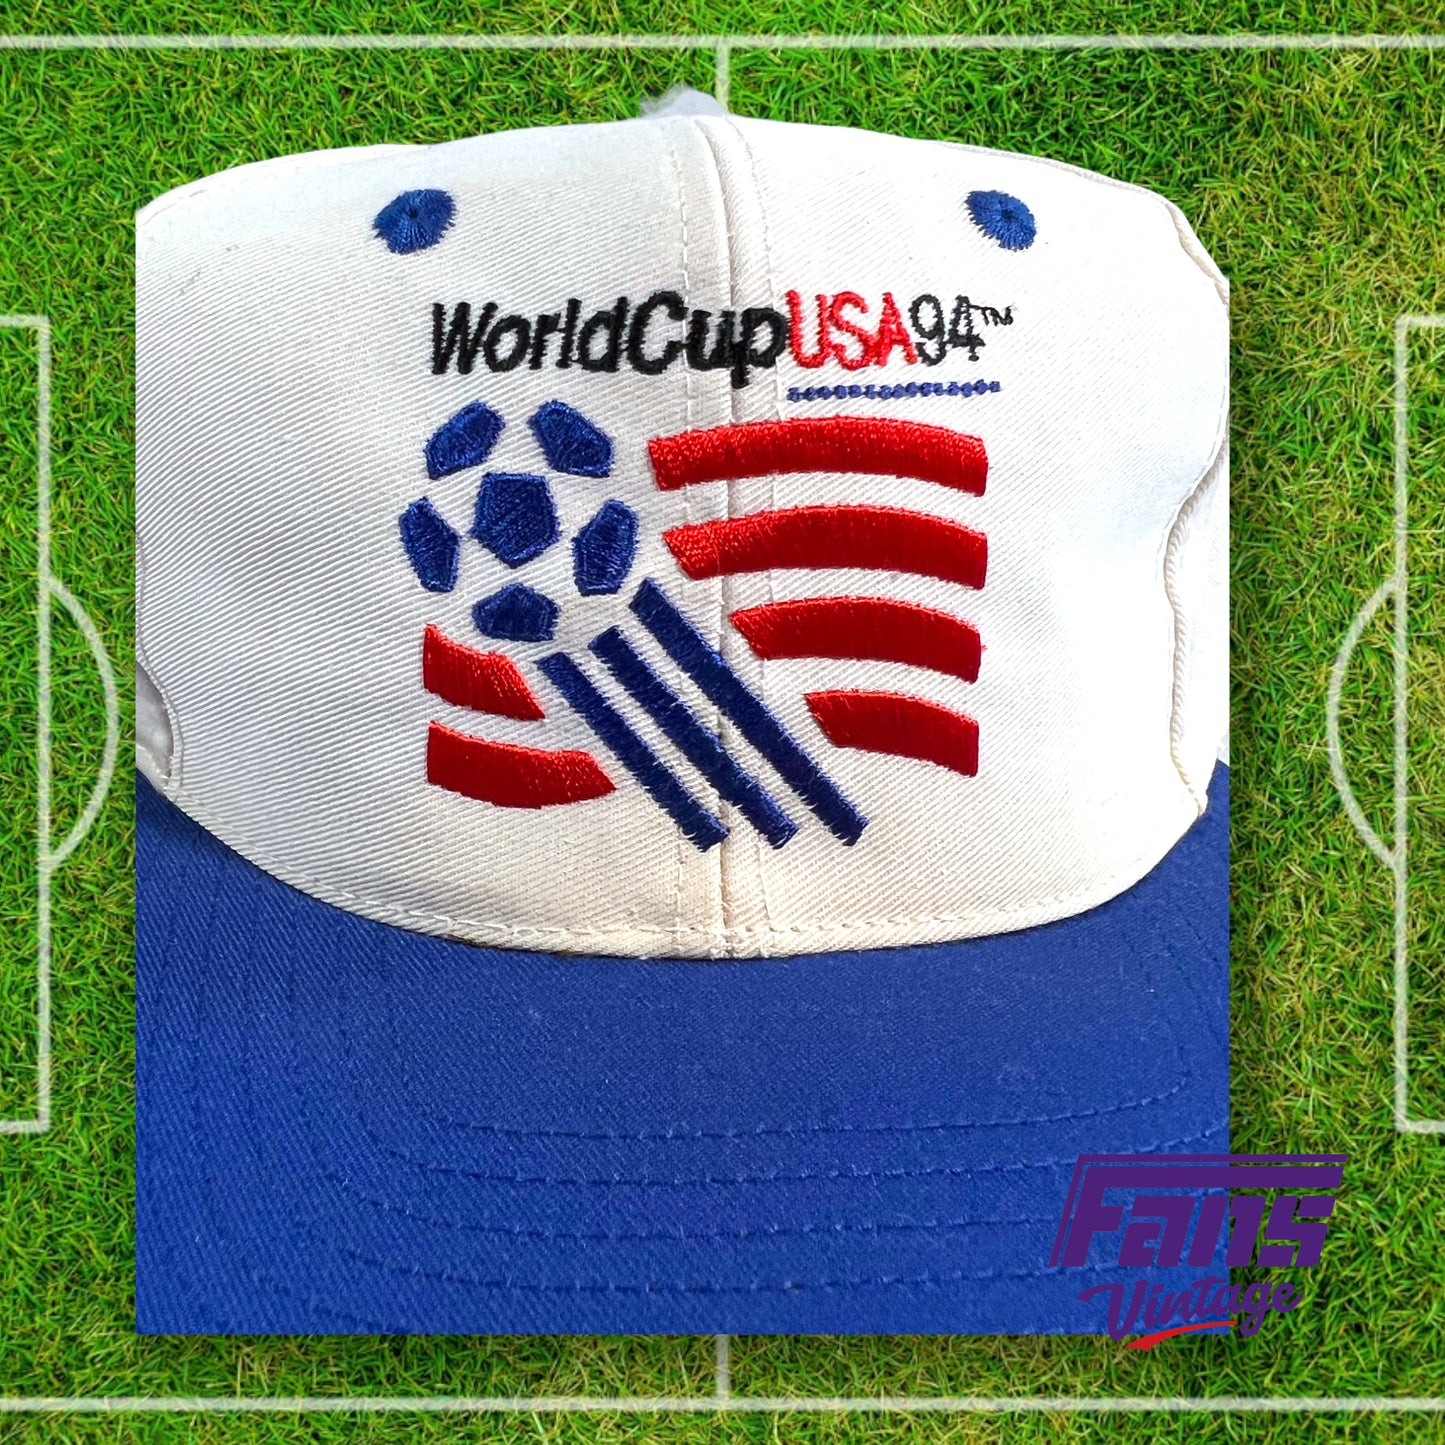 90s vintage Wold Cup USA snapback hat